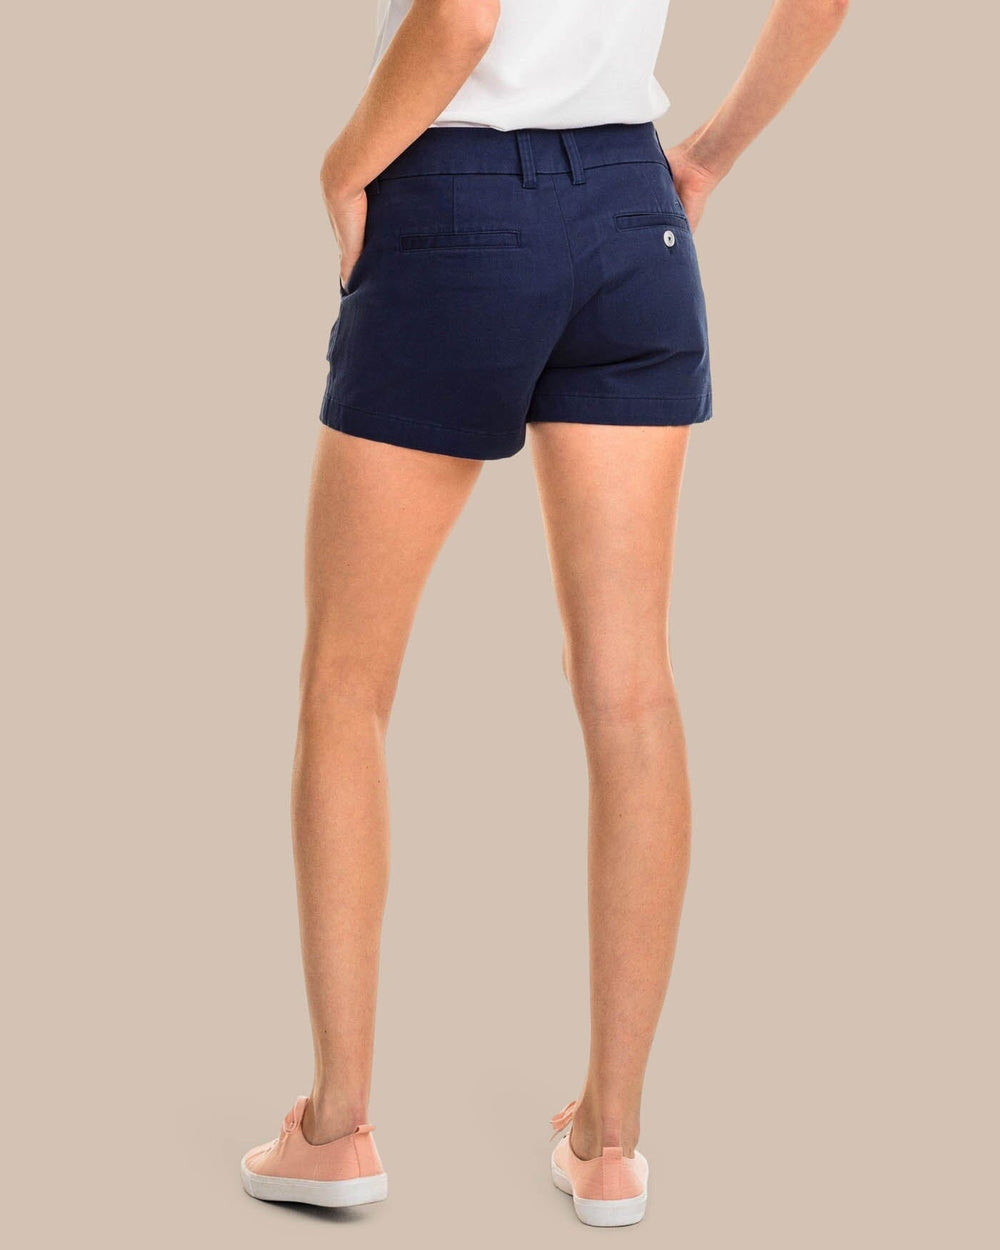 The back view of the Women's Navy 3 Inch Leah Short by Southern Tide - Nautical Navy